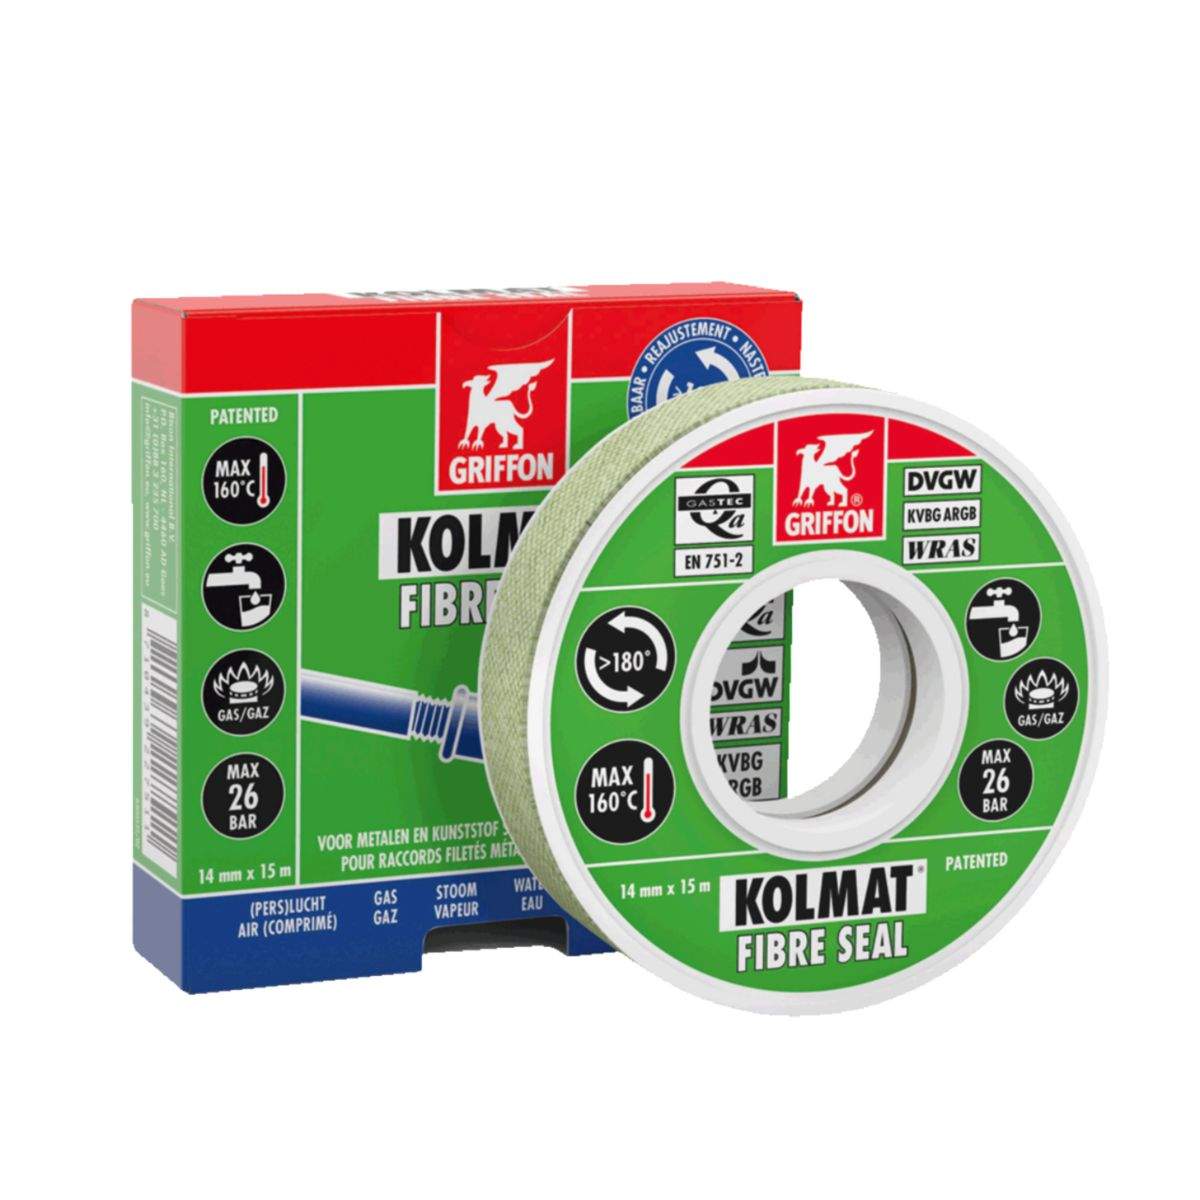 KOLMAT fibre SEAL tape for sealing threaded connections